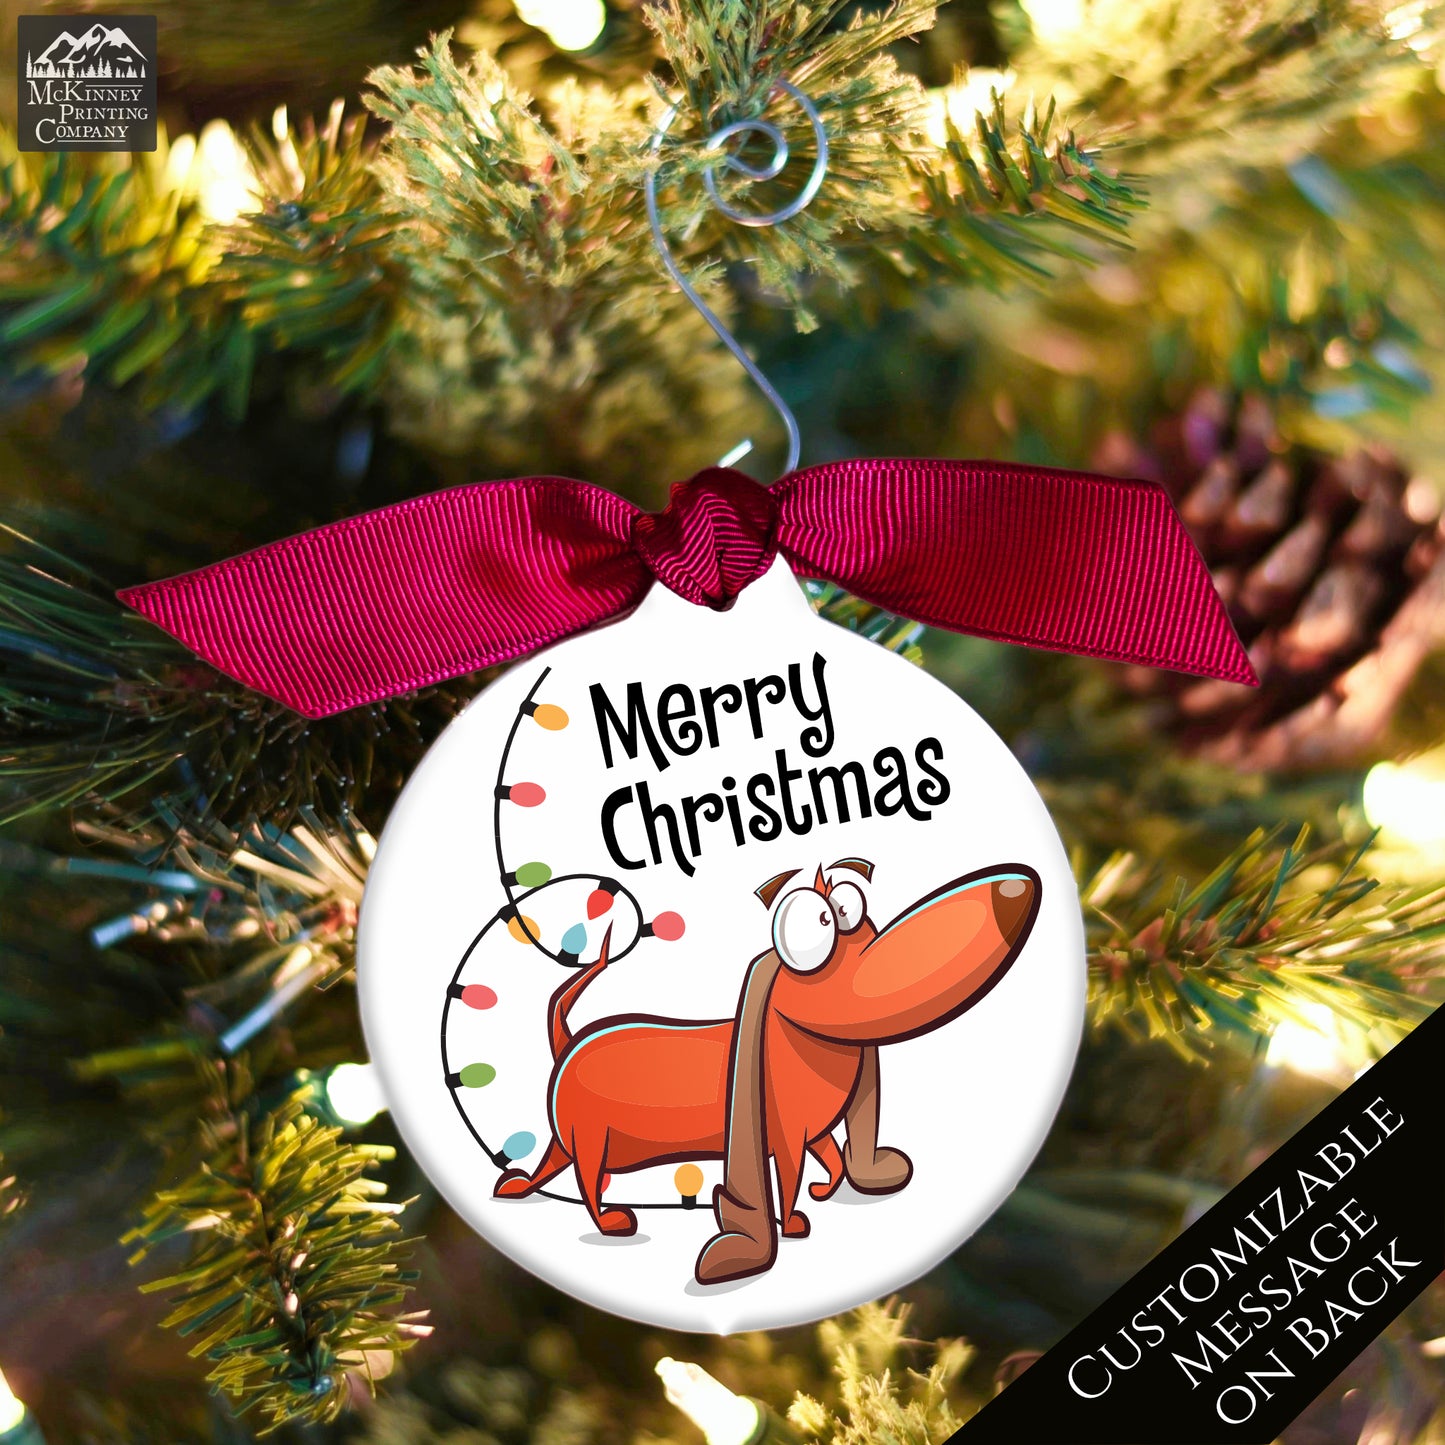 Dachshund - Christmas Ornament, Dog Gift, Tree Décor, Personalized